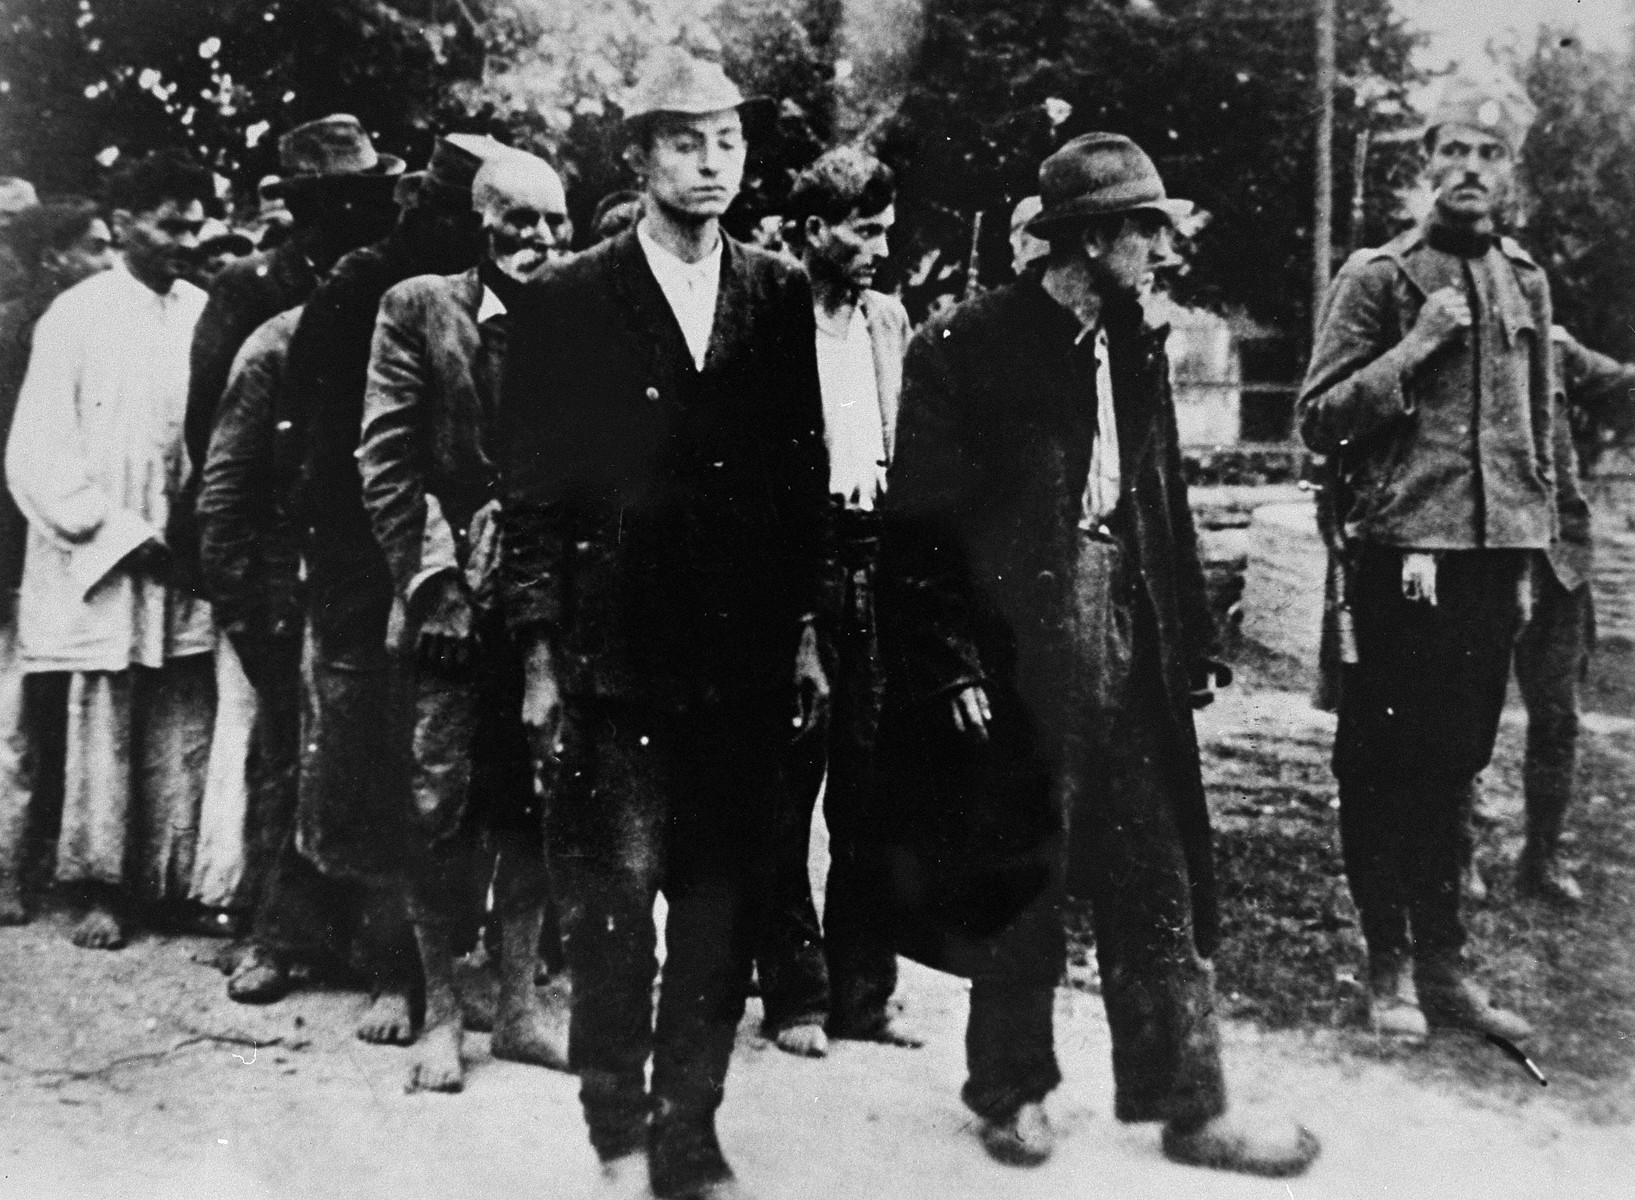 A Serbian gendarme serving the Serbian puppet government led by Milan Nedic, escorts a group of Roma to their execution.